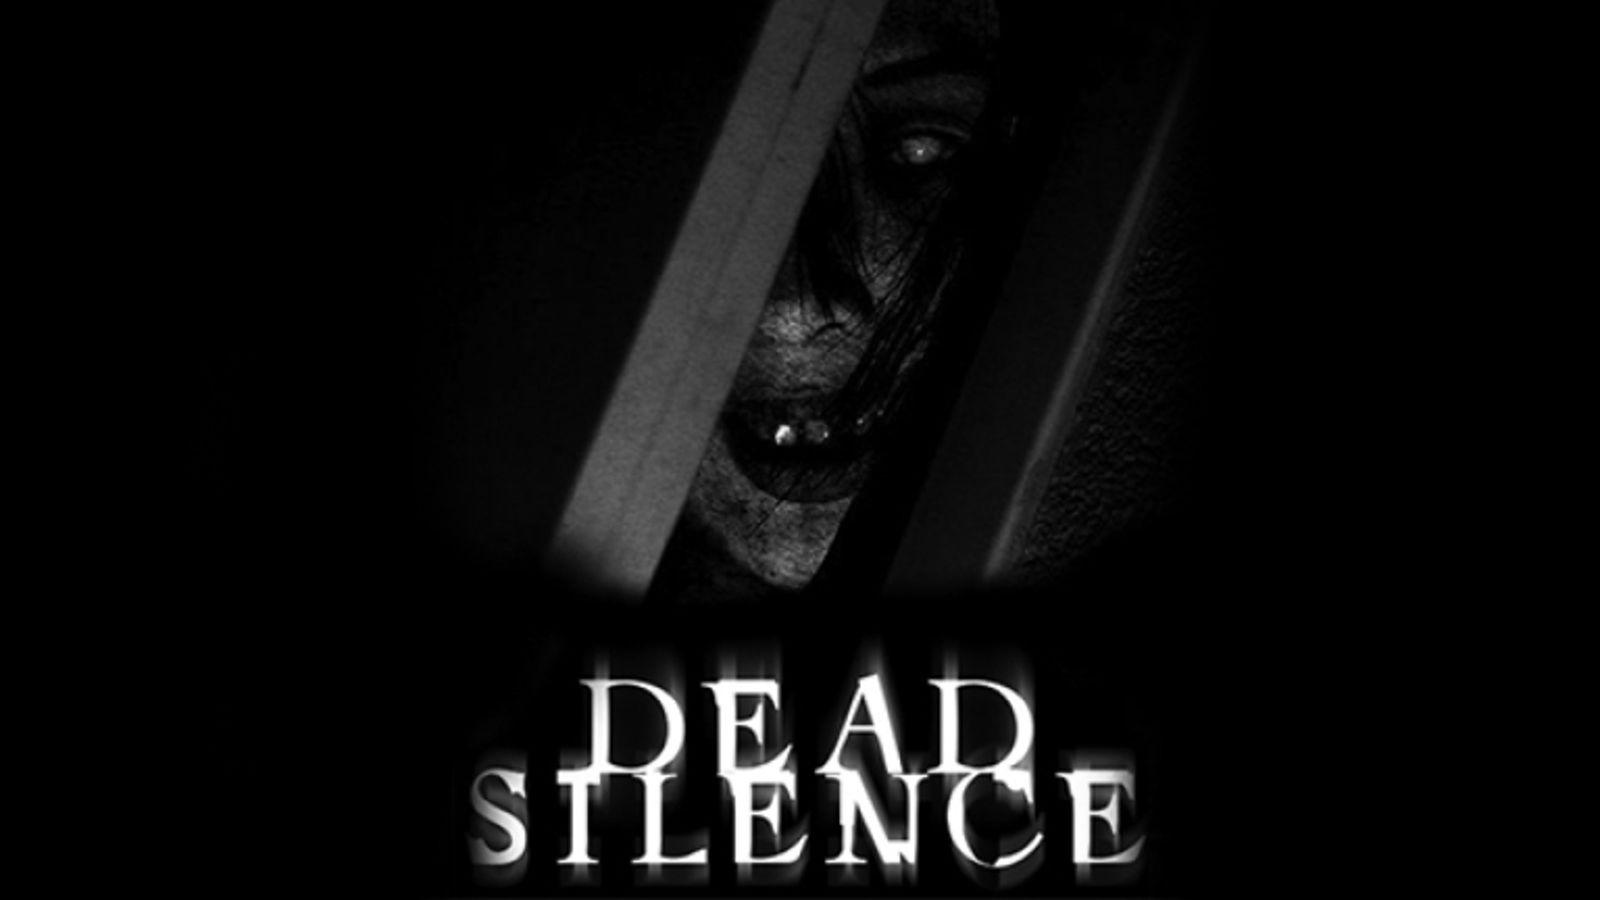 Screenshot from Dead Silence, showing a demonic face locked behind bars